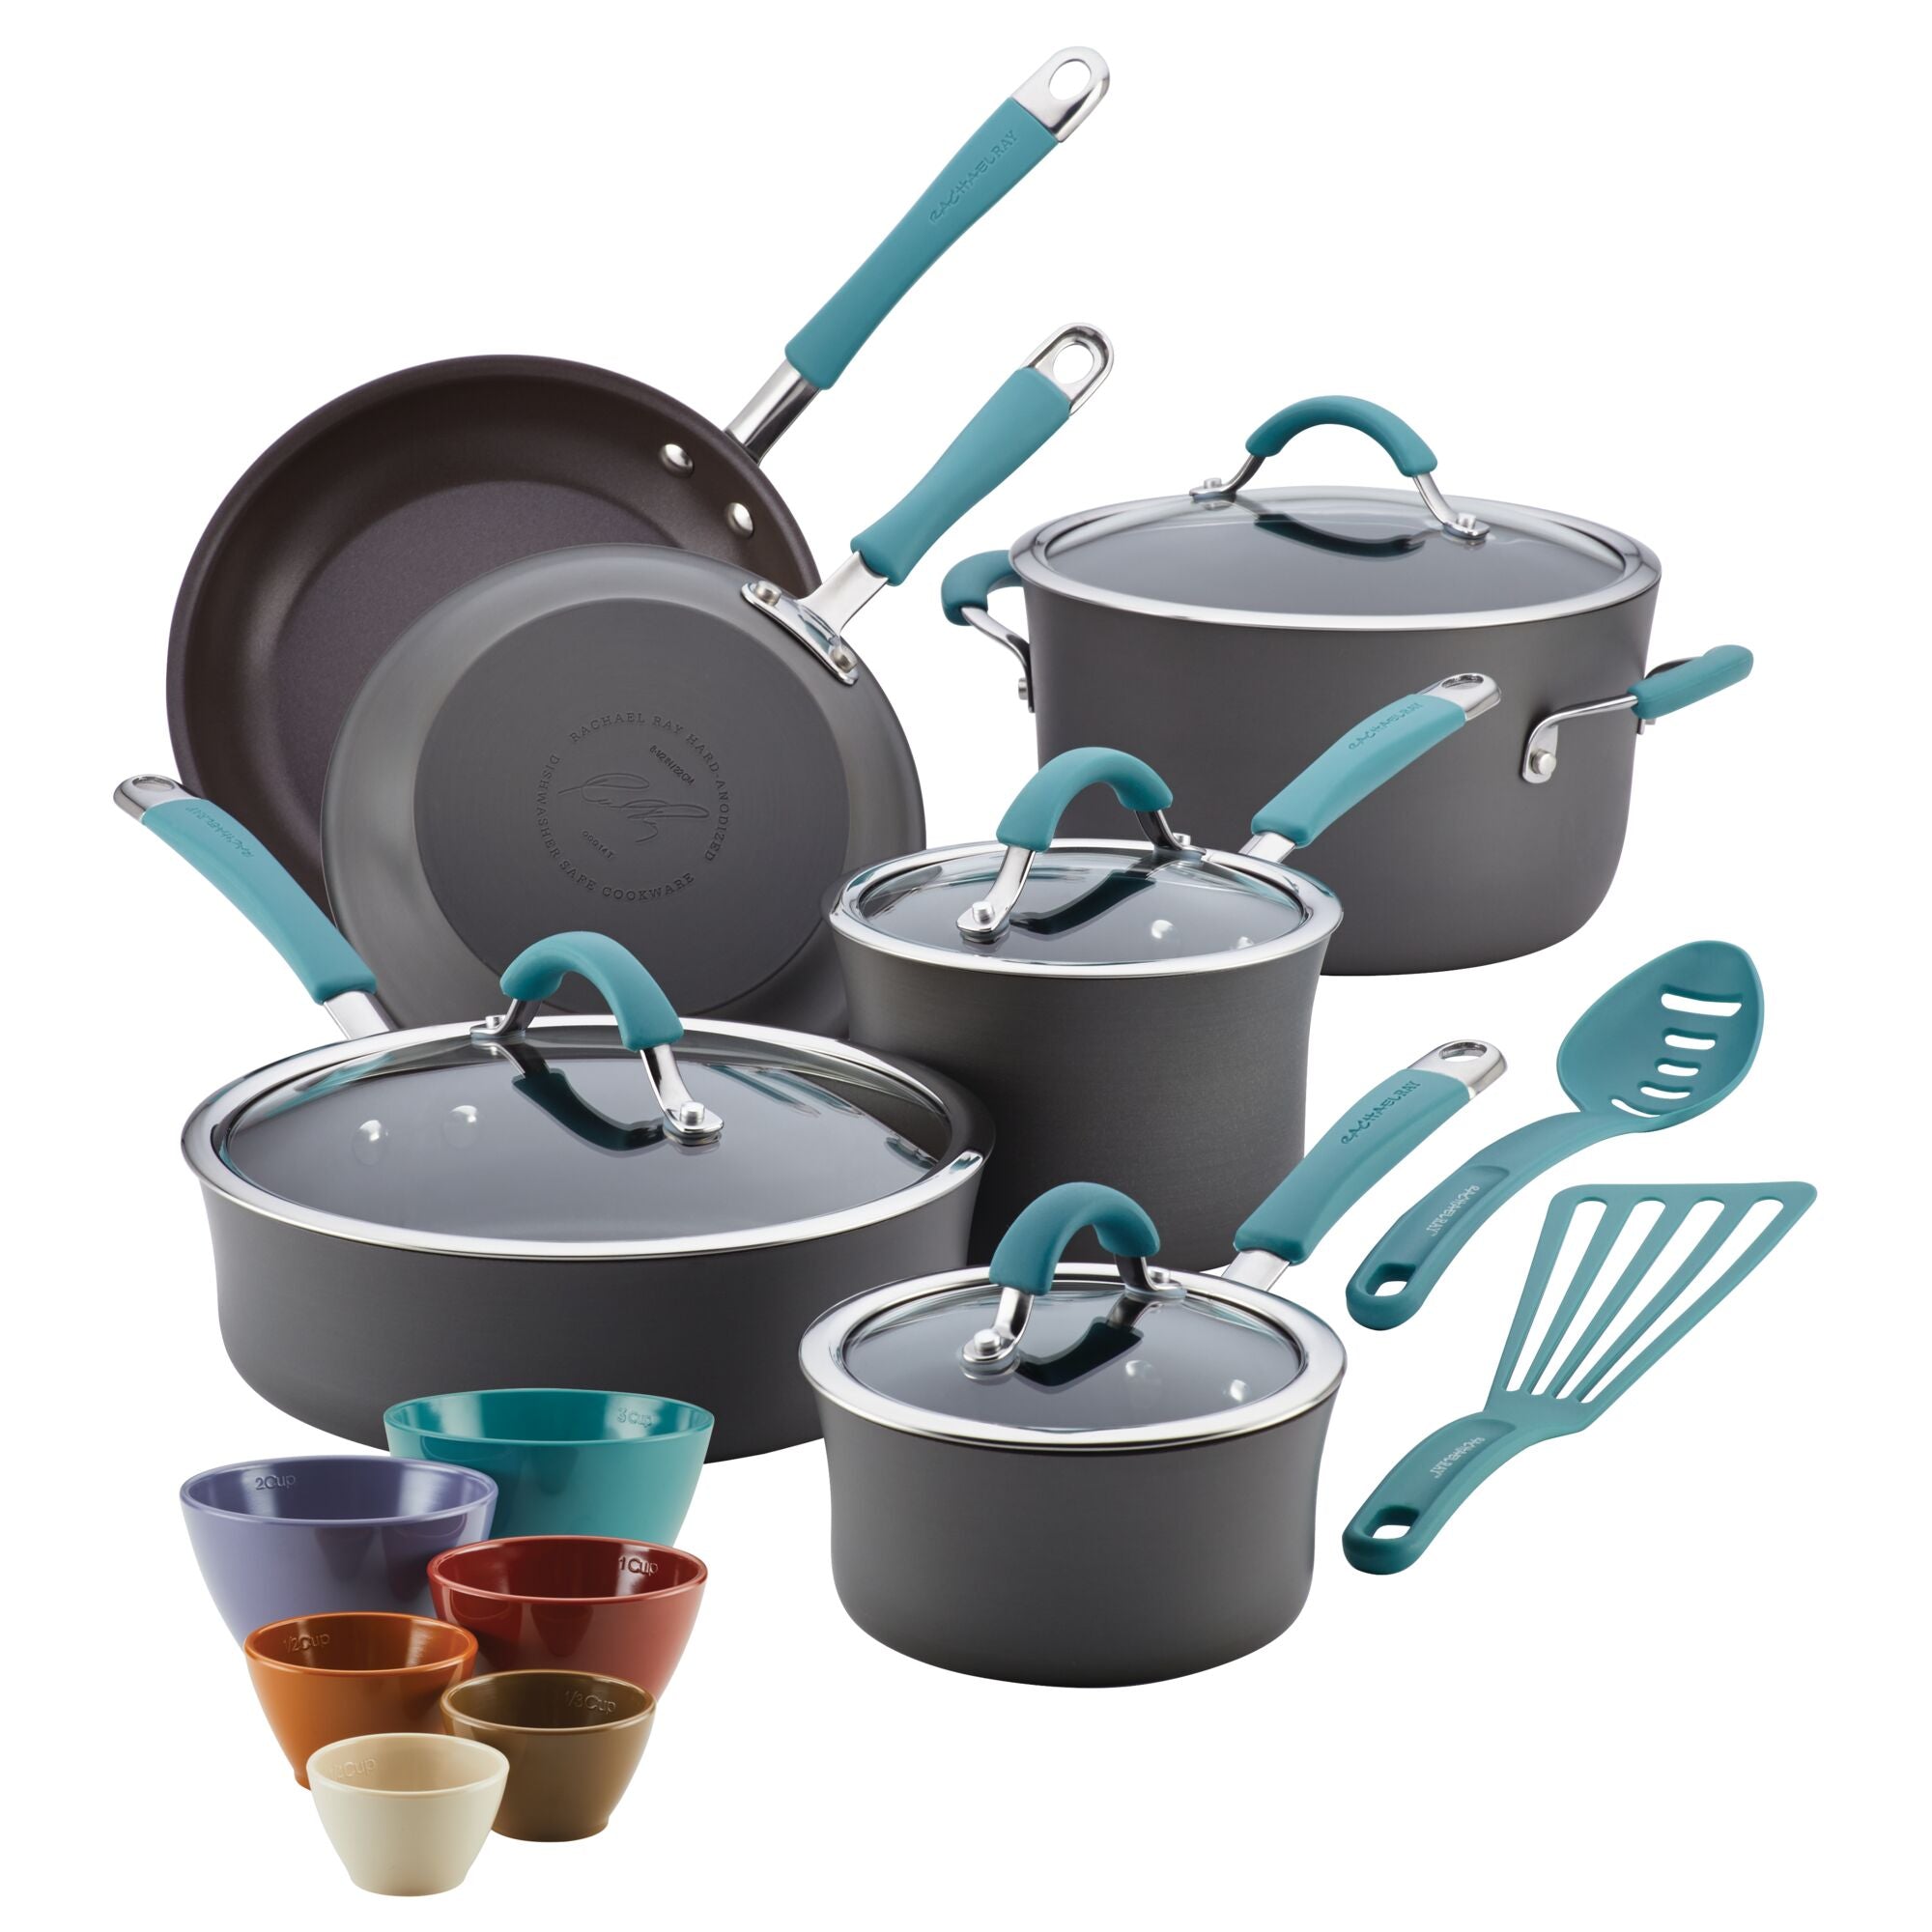 18-Piece Cucina Hard Anodized Nonstick Cookware and Prep Bowl Set